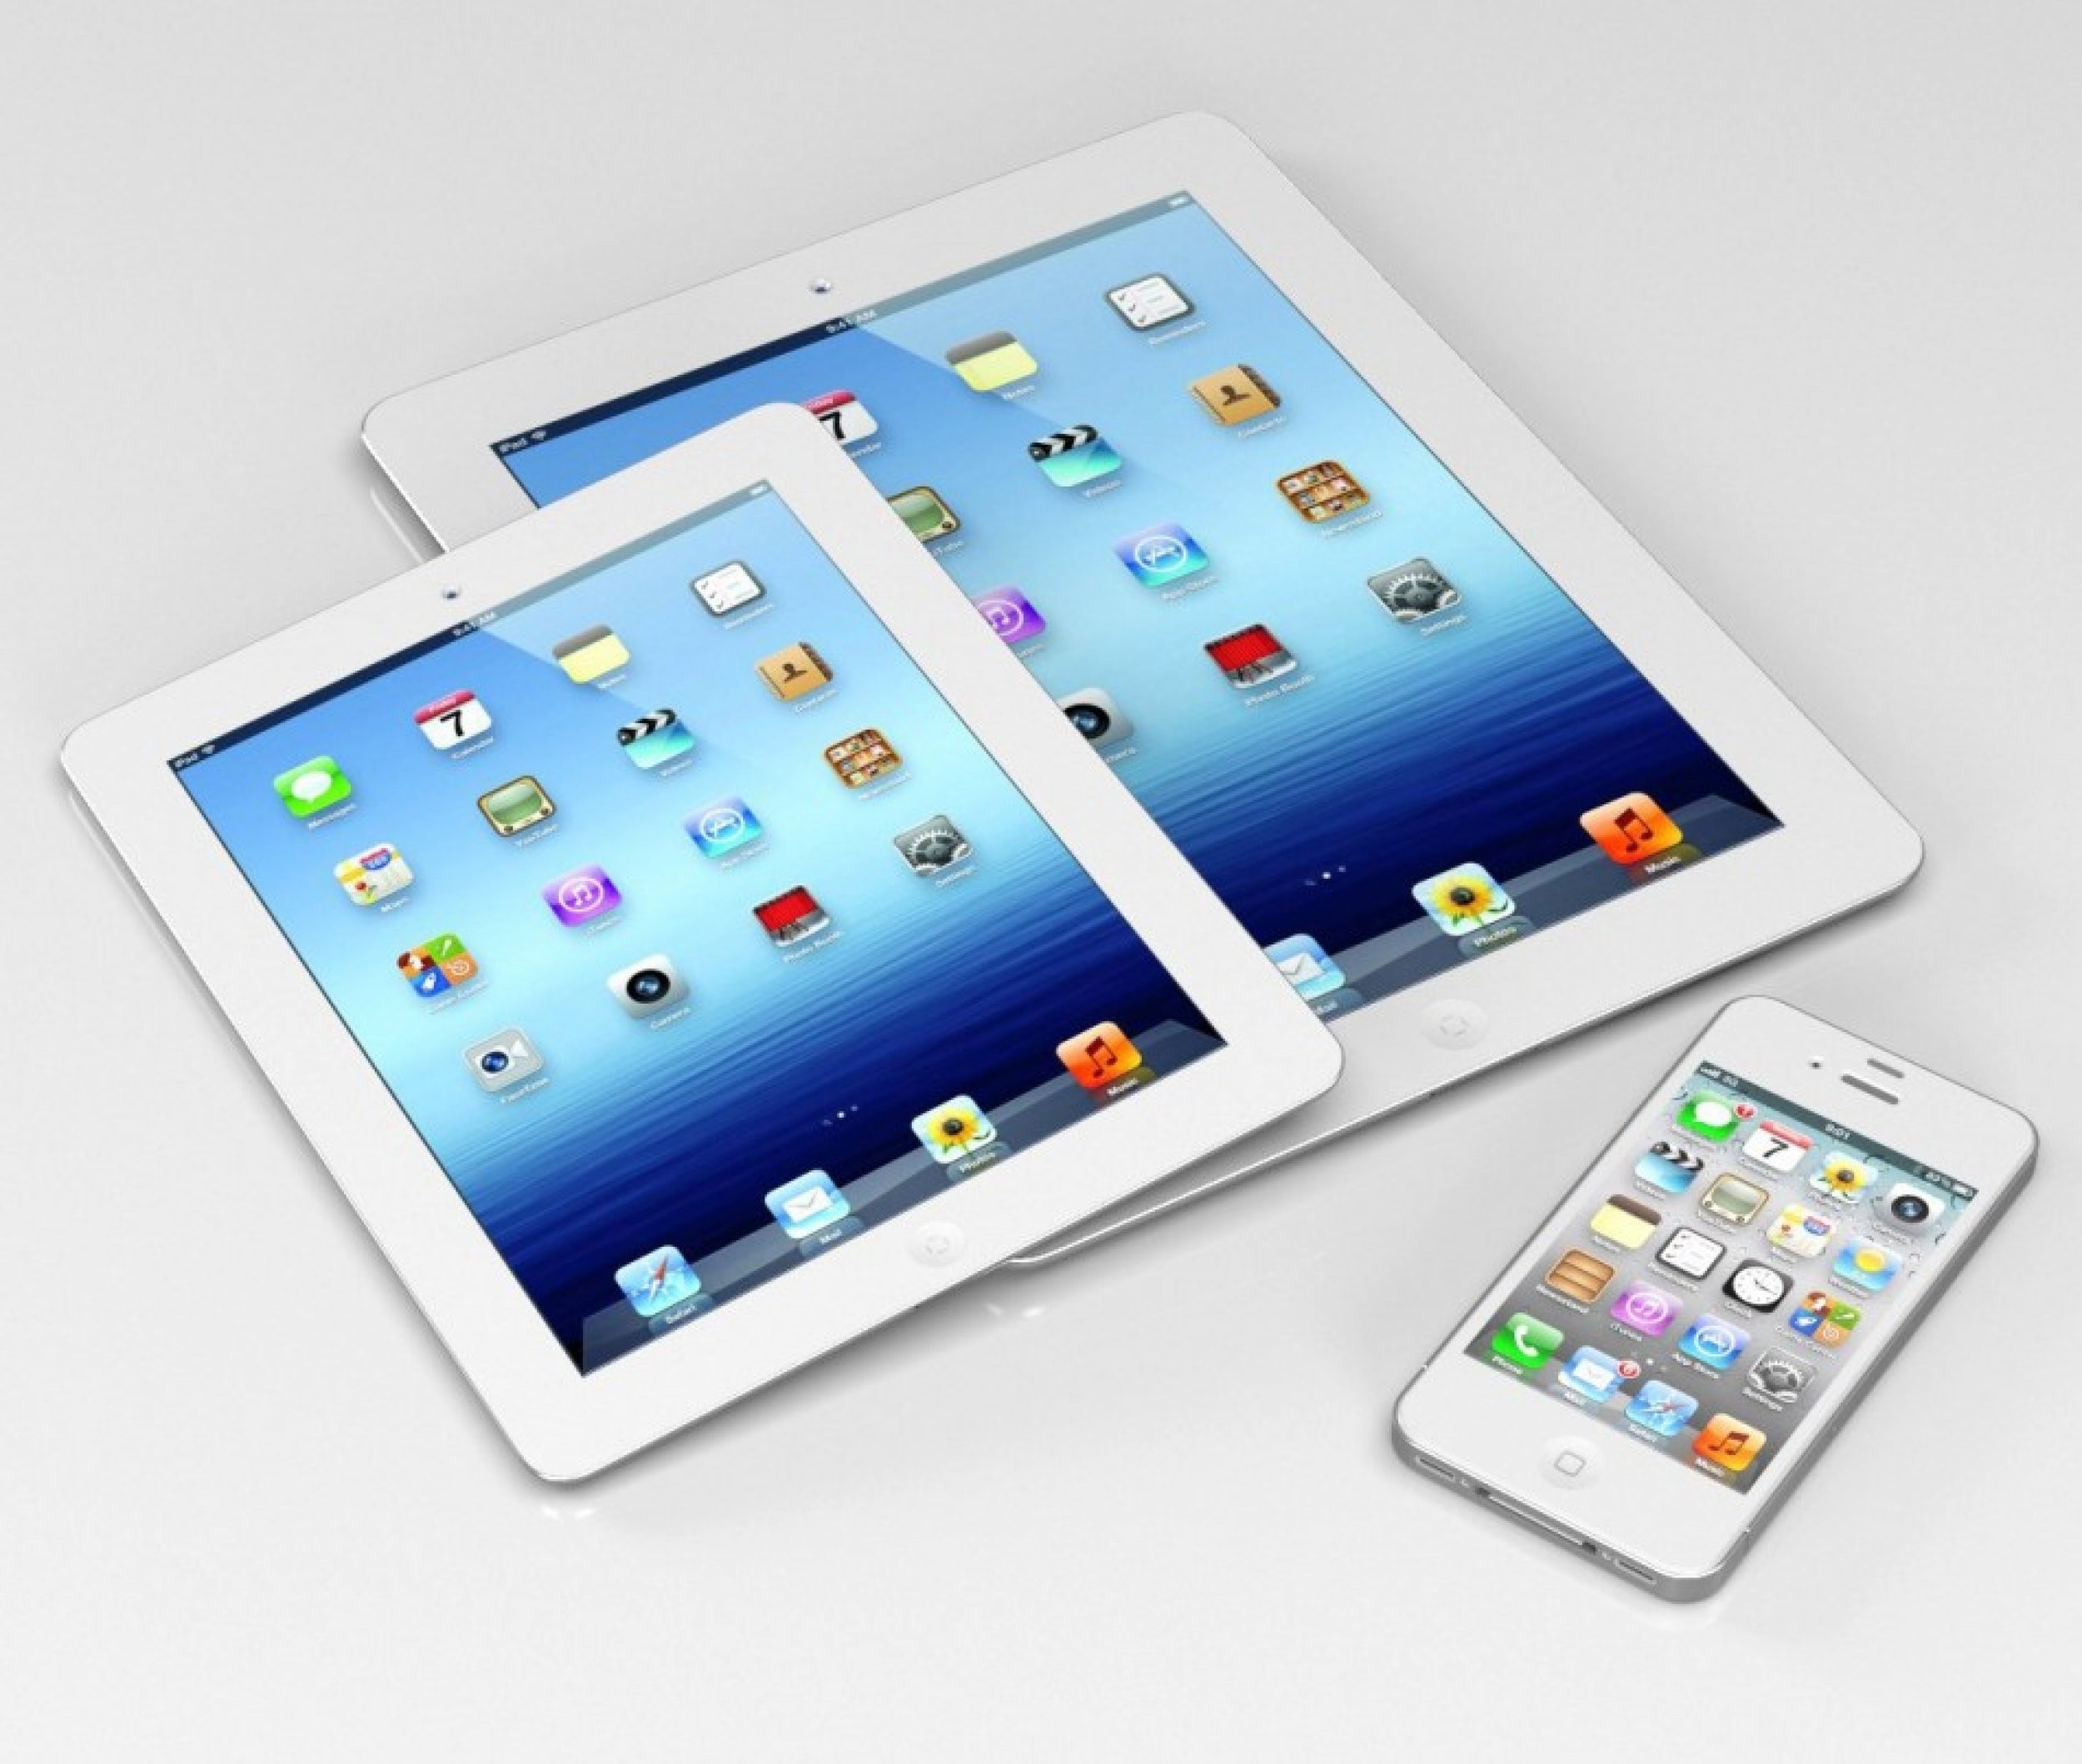 Apple iPad Mini Release Date May Coincide With iTunes 11 Launch RUMORS